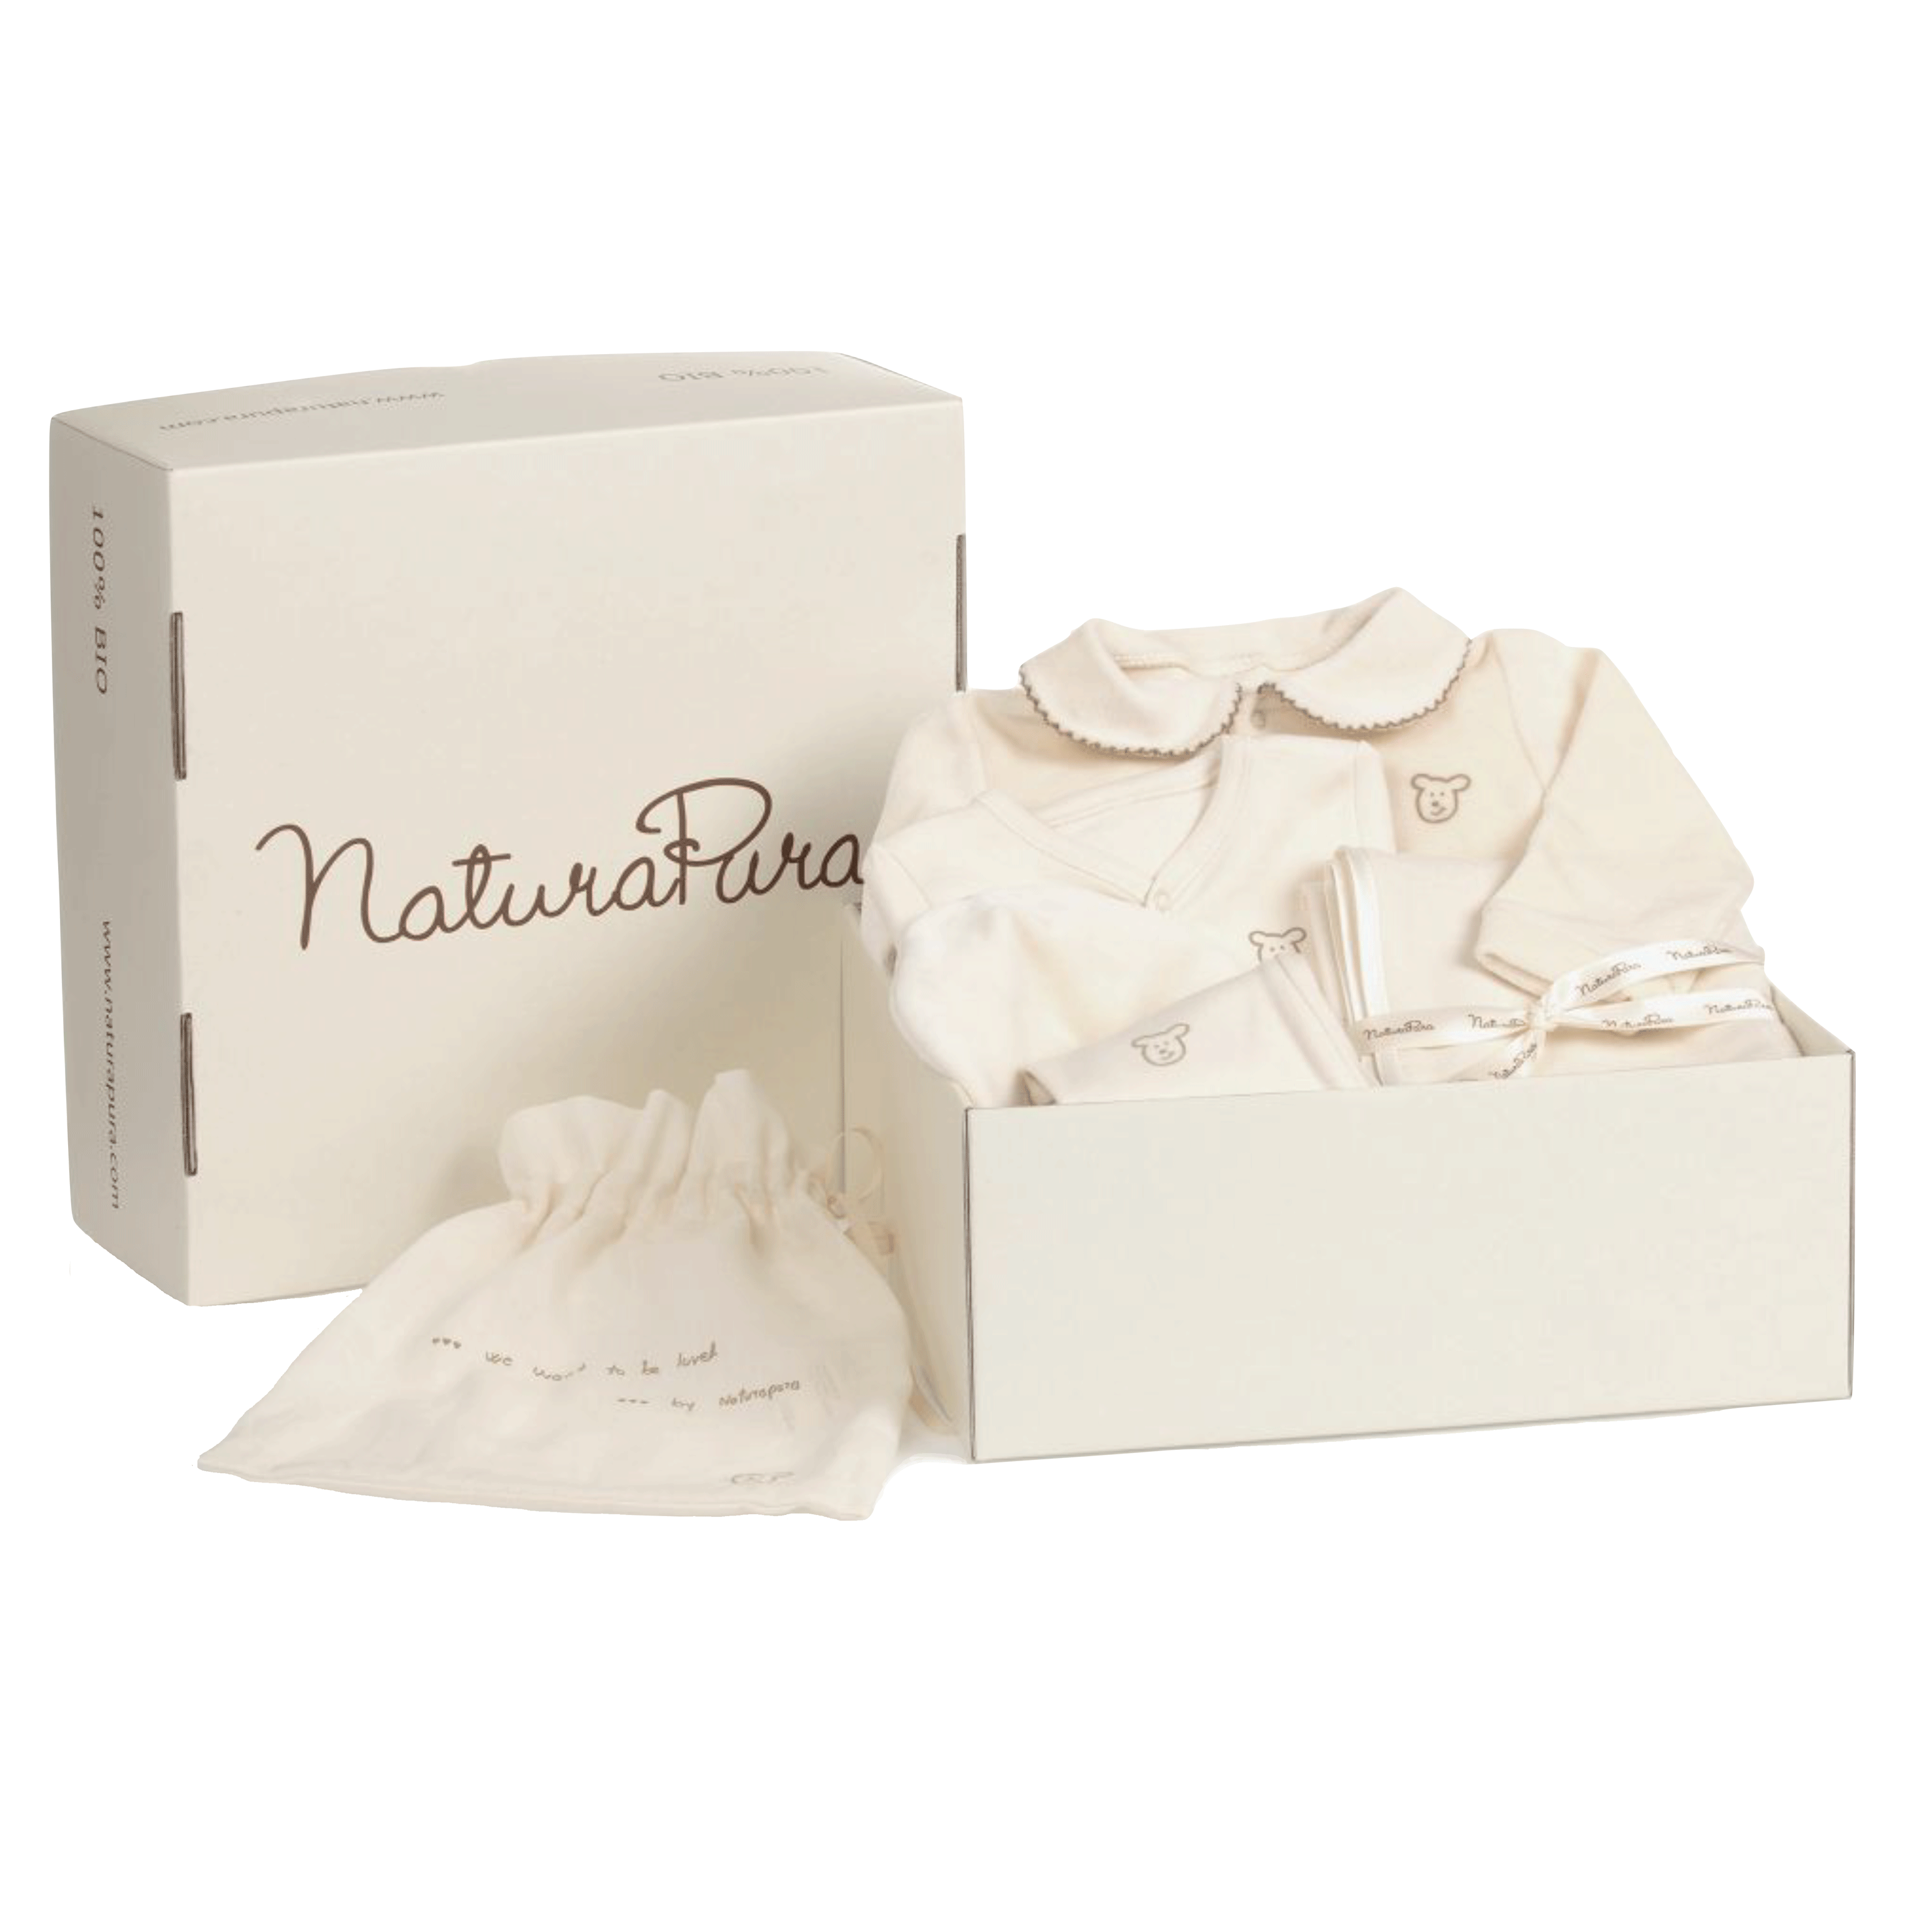 Organic Cotton Baby Silver Pack of 8 pieces by Naturapura at Bonjour Baby Baskets